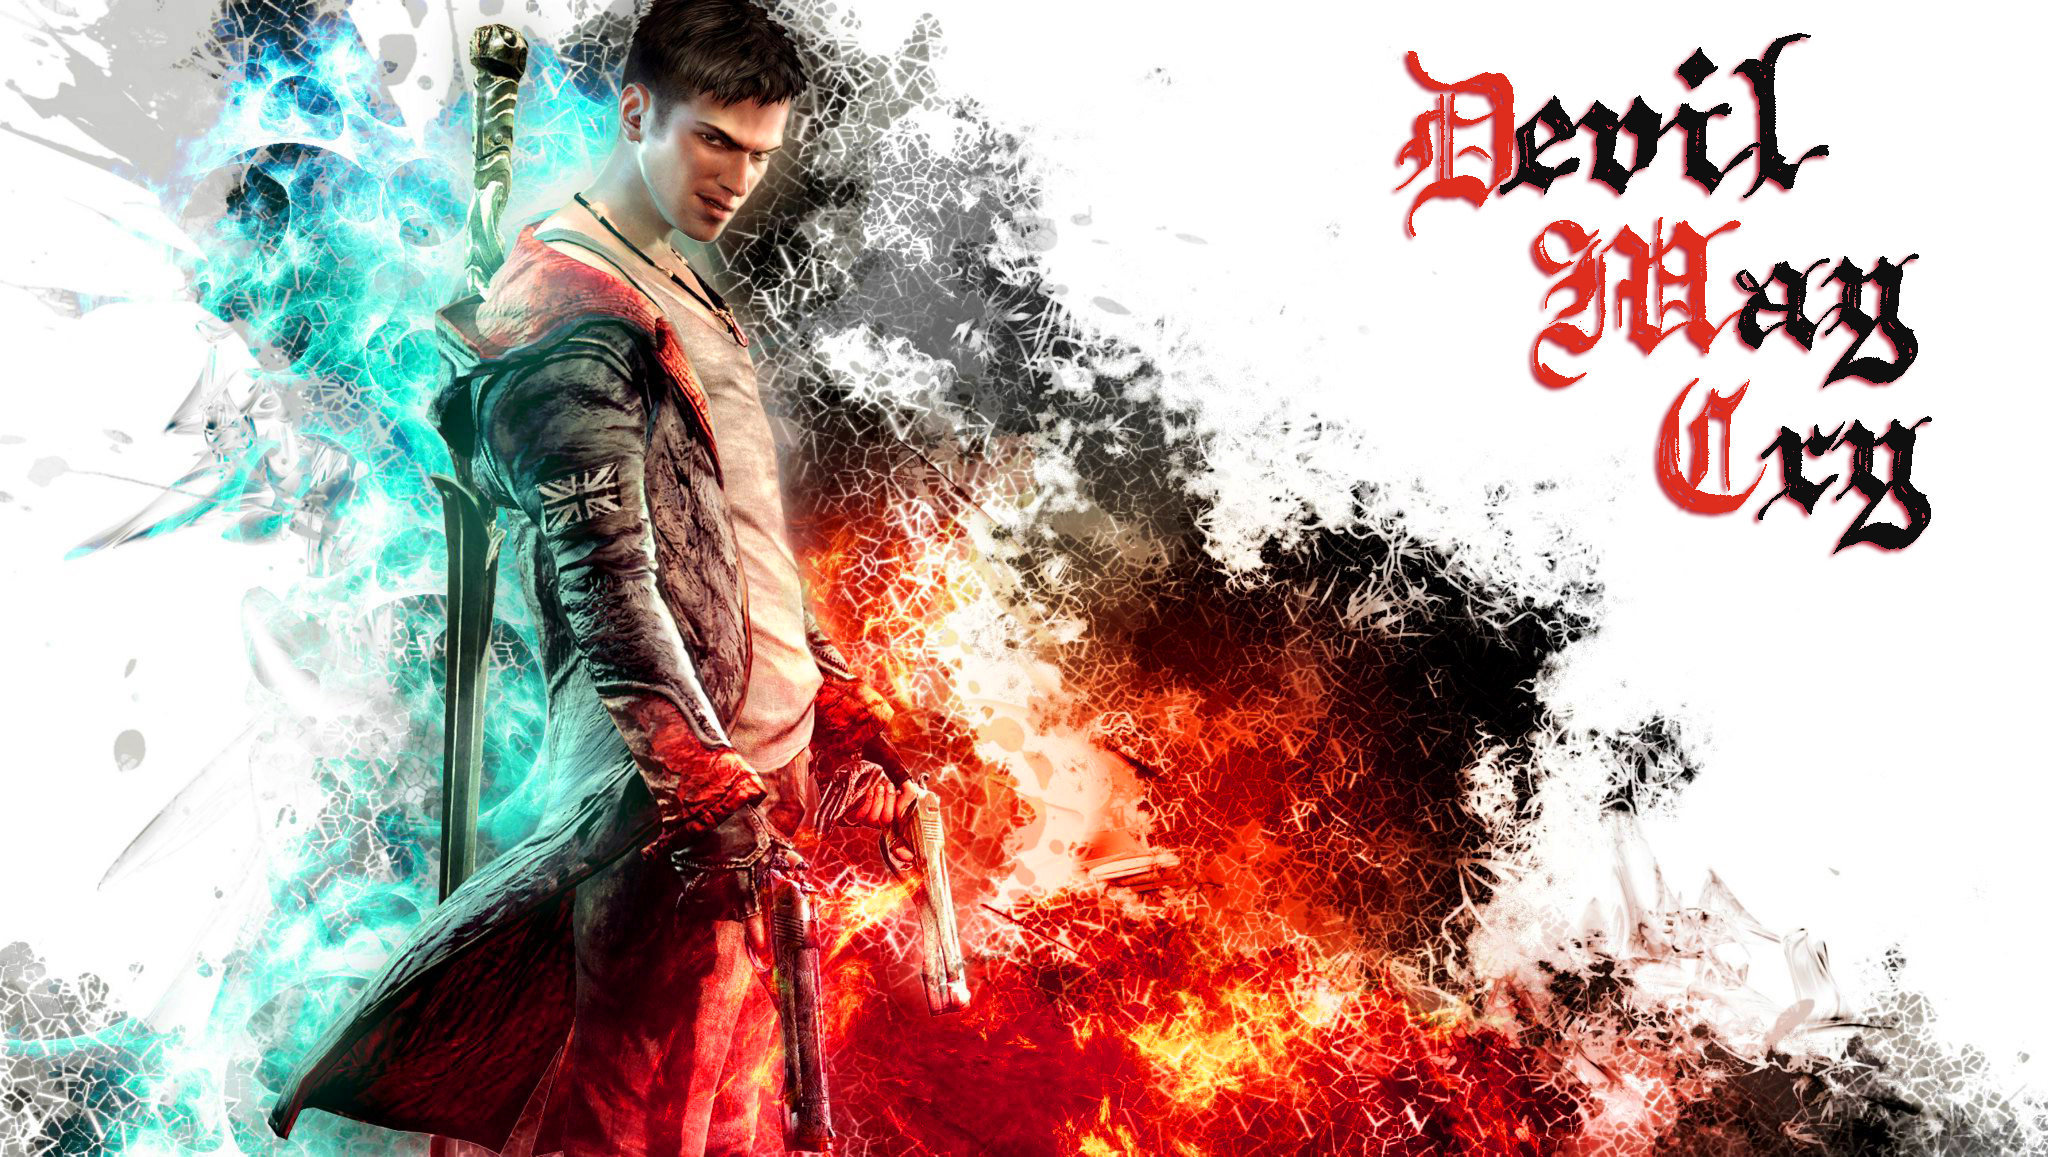 download free dmc devil may cry